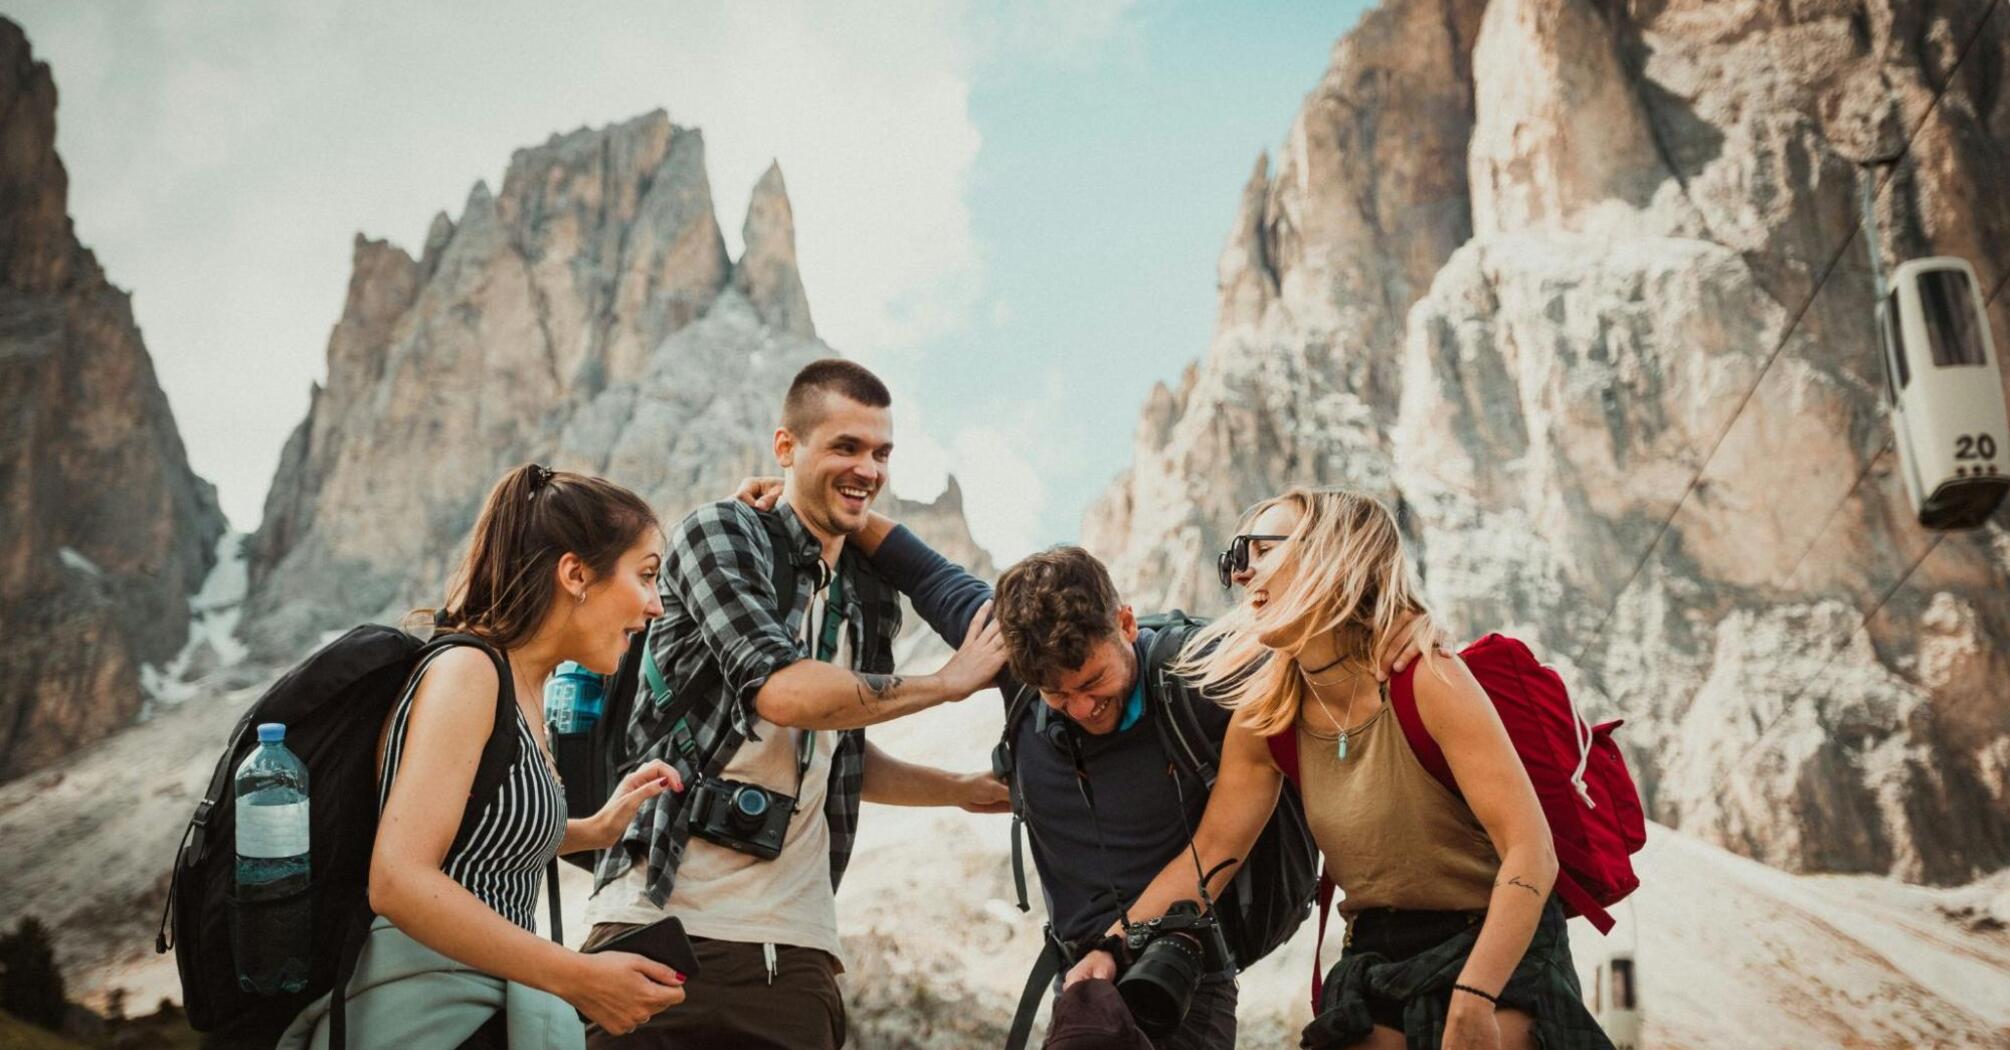 Group of people traveling mountains together